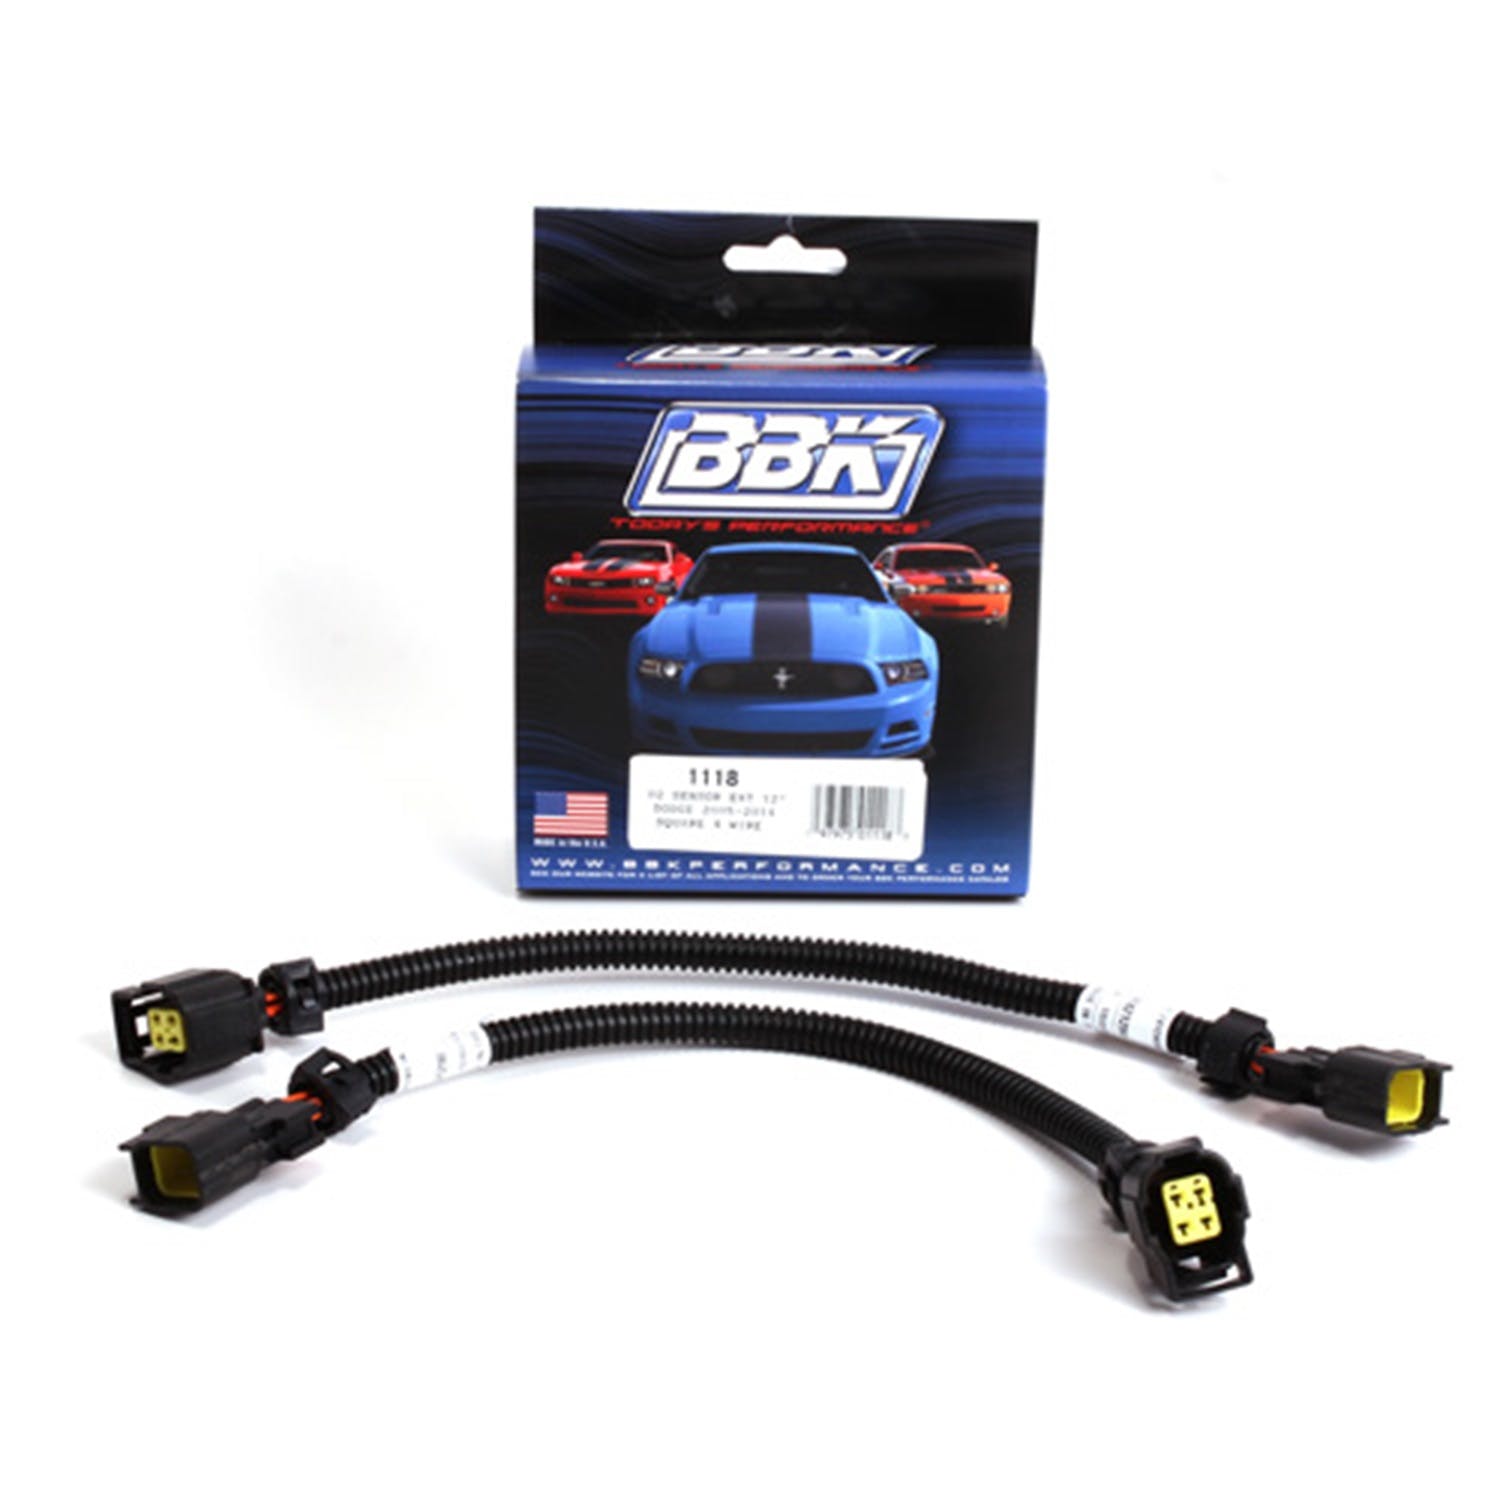 BBK Performance Parts 1118 O2 Sensor Wire Extension Harness